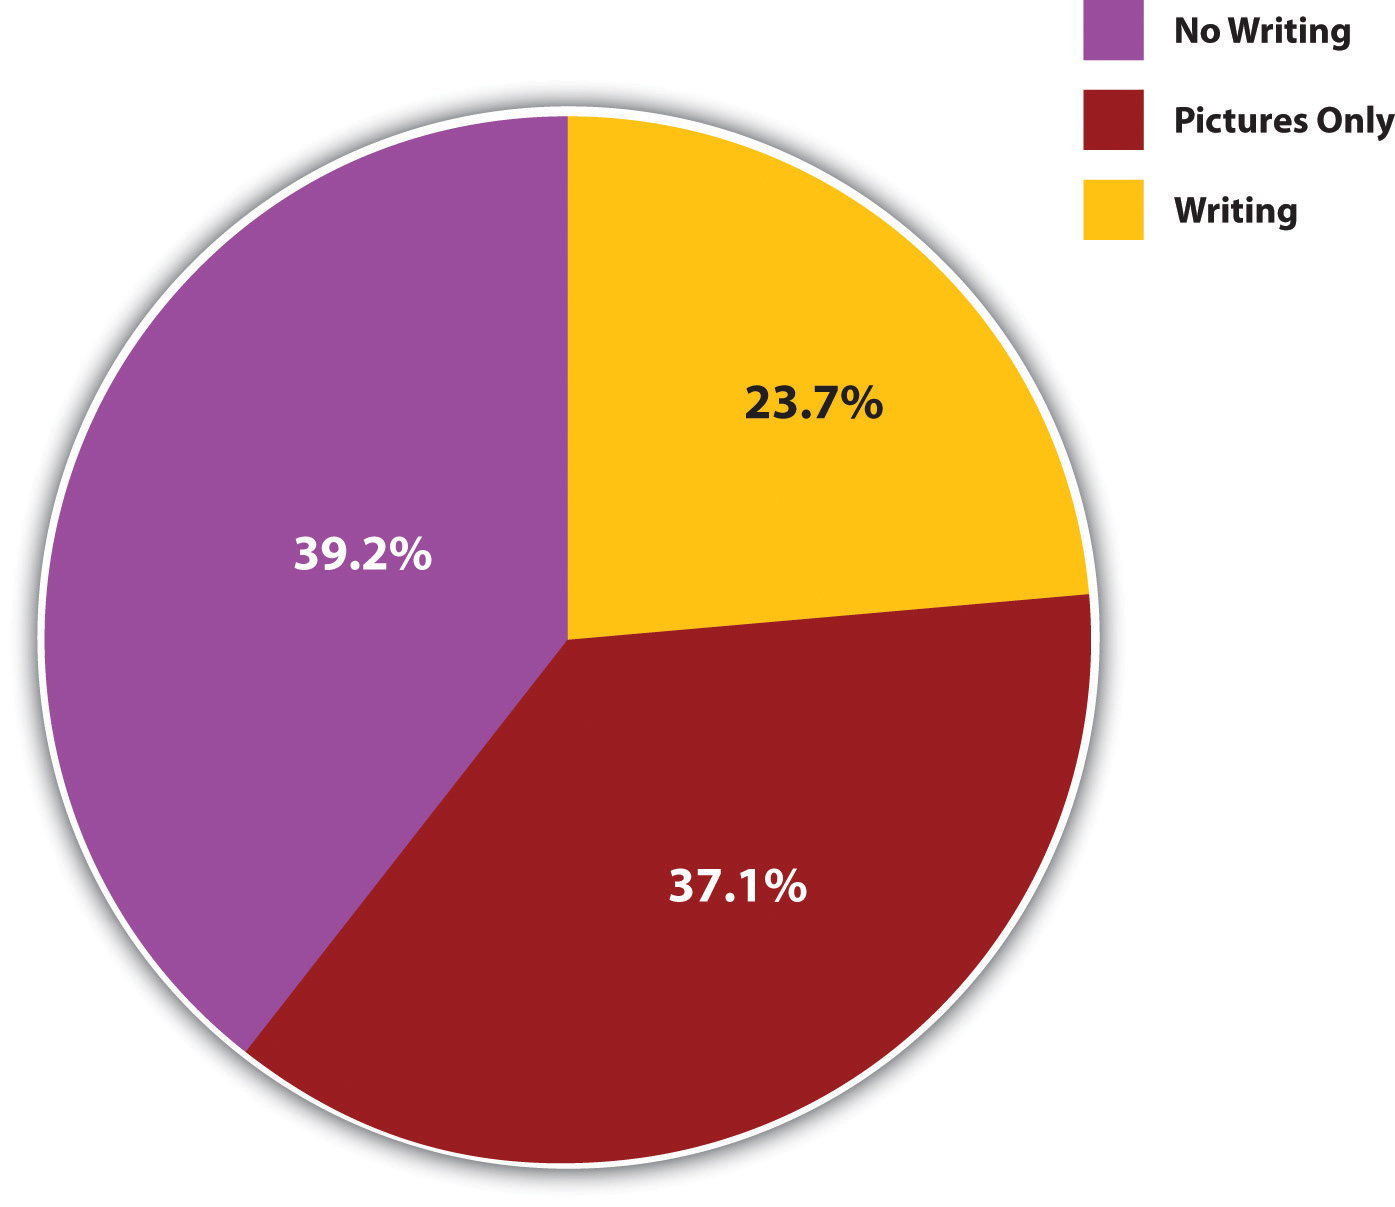 The Presence of Written Language (Percentage of Societies): 39.2% no writing, 37.1% pictures only, 23.7% writing